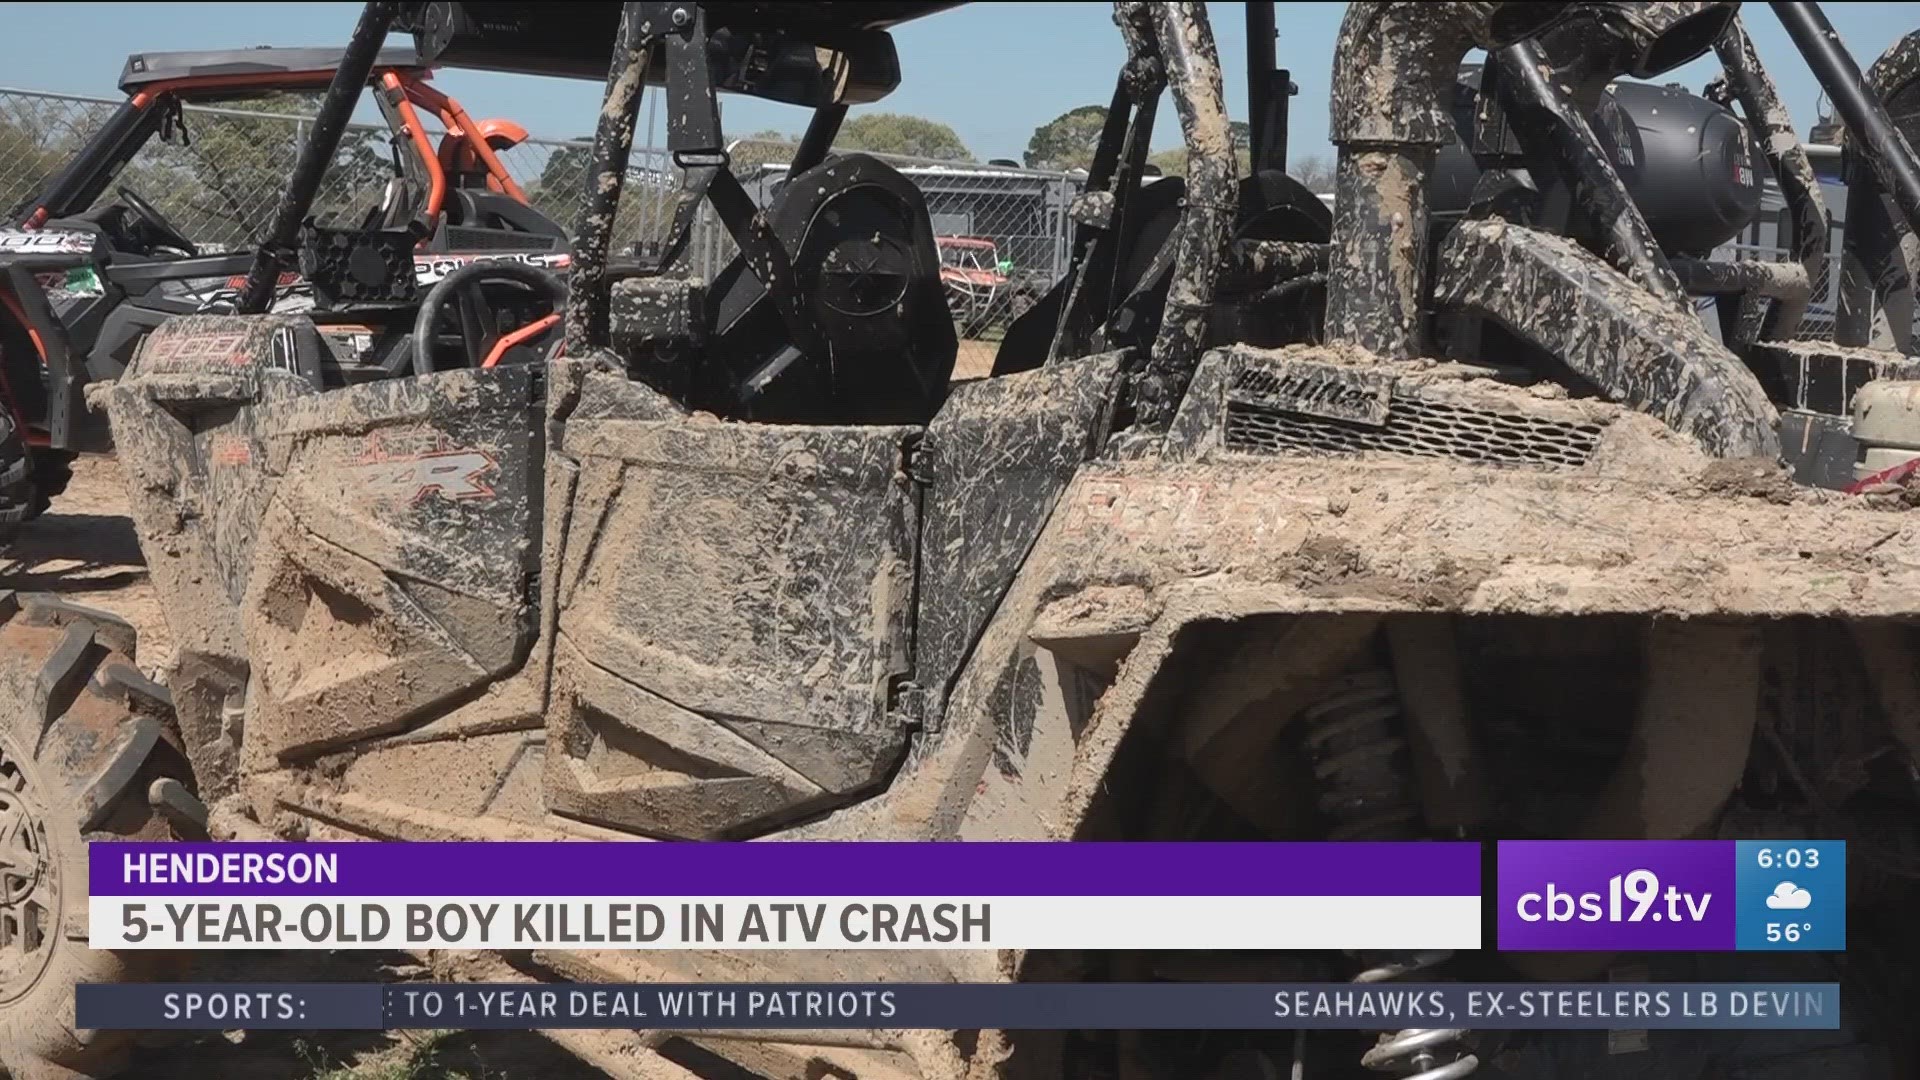 Investigators said Darrell Davis, father of two boys (ages 5 and 9), was driving at the time of the crash. His sons were passengers in the ATV.